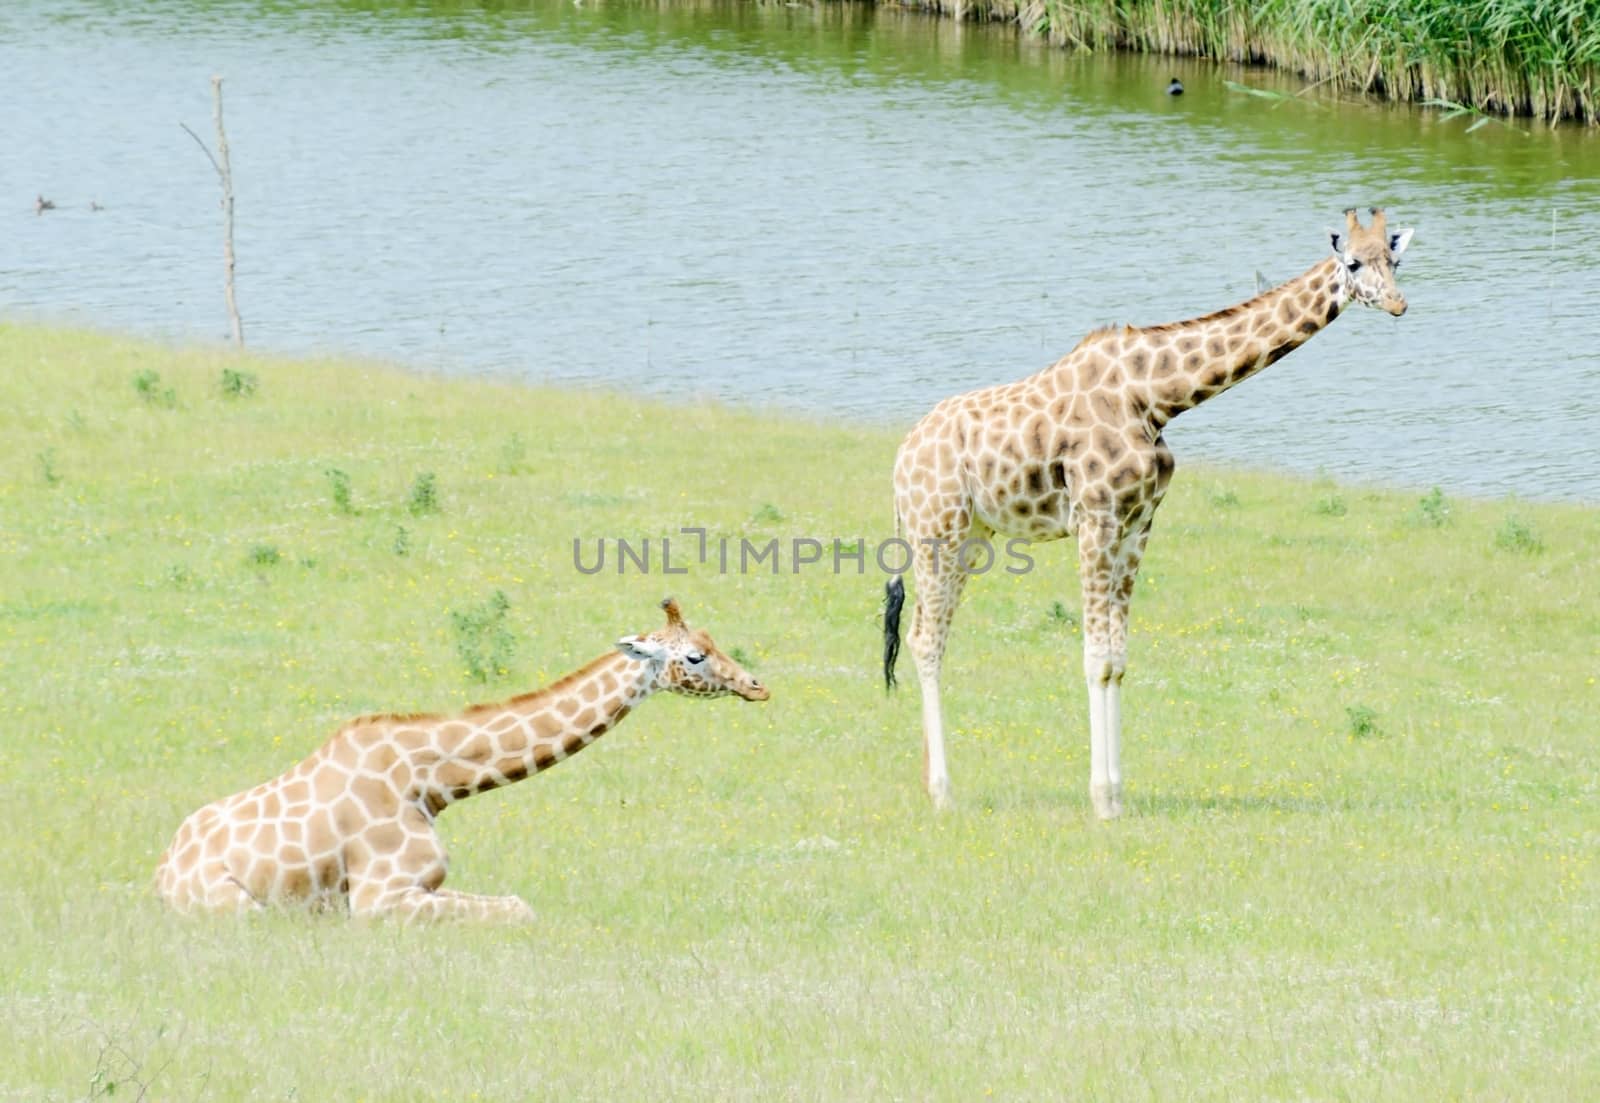 Two giraffe standing and sitting on a sunny day with river in background